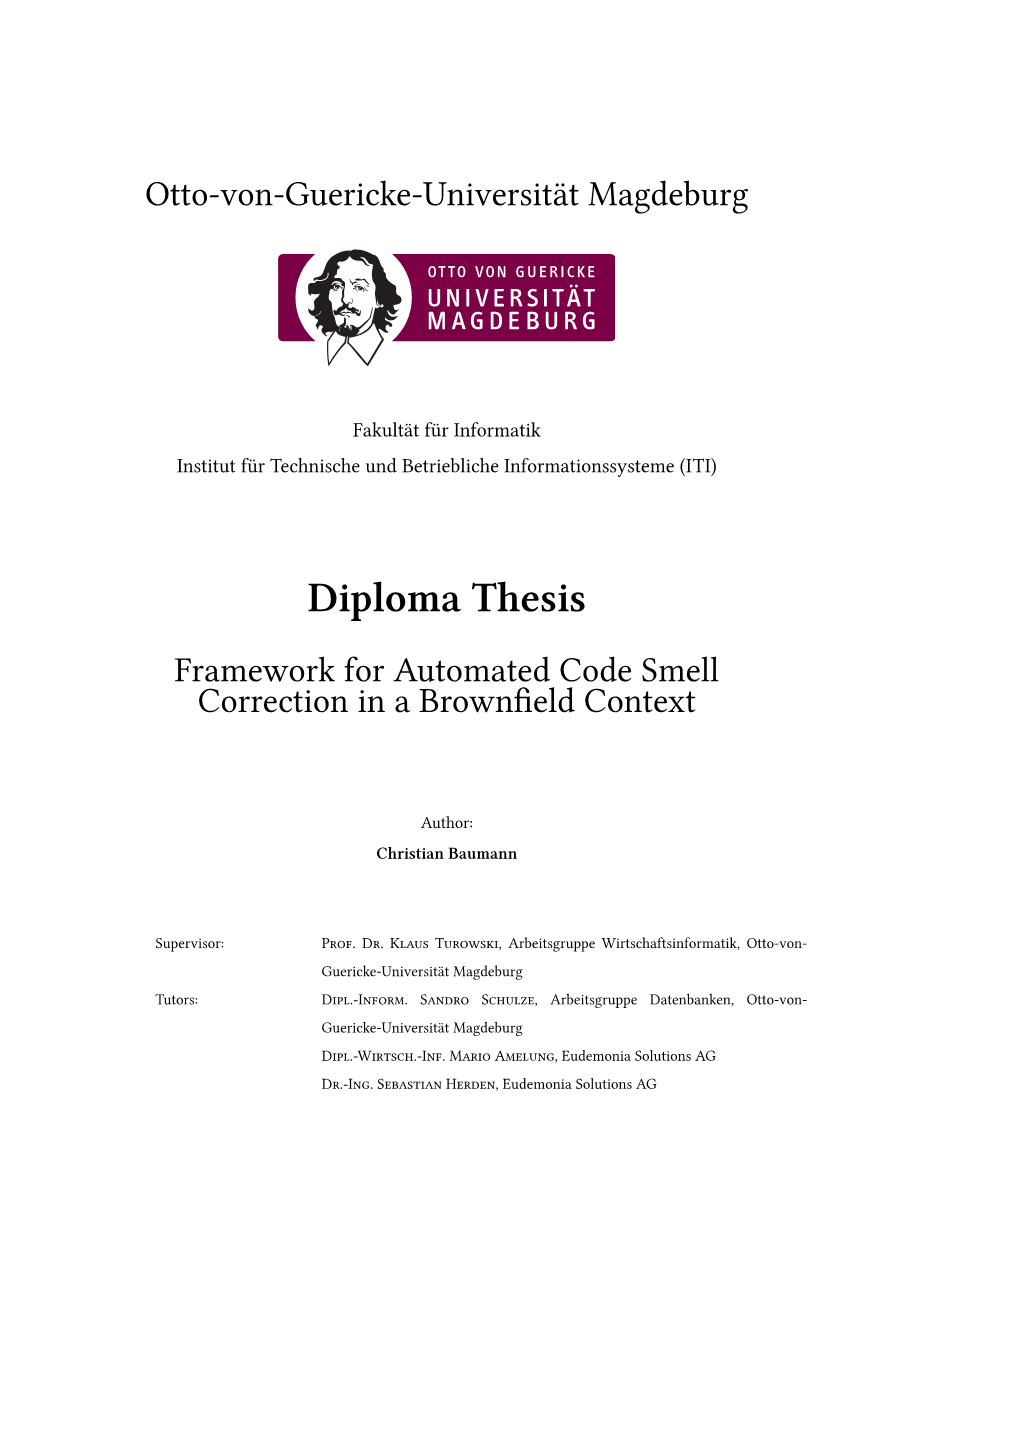 Diploma Thesis Framework for Automated Code Smell Correction in a Brownveld Context